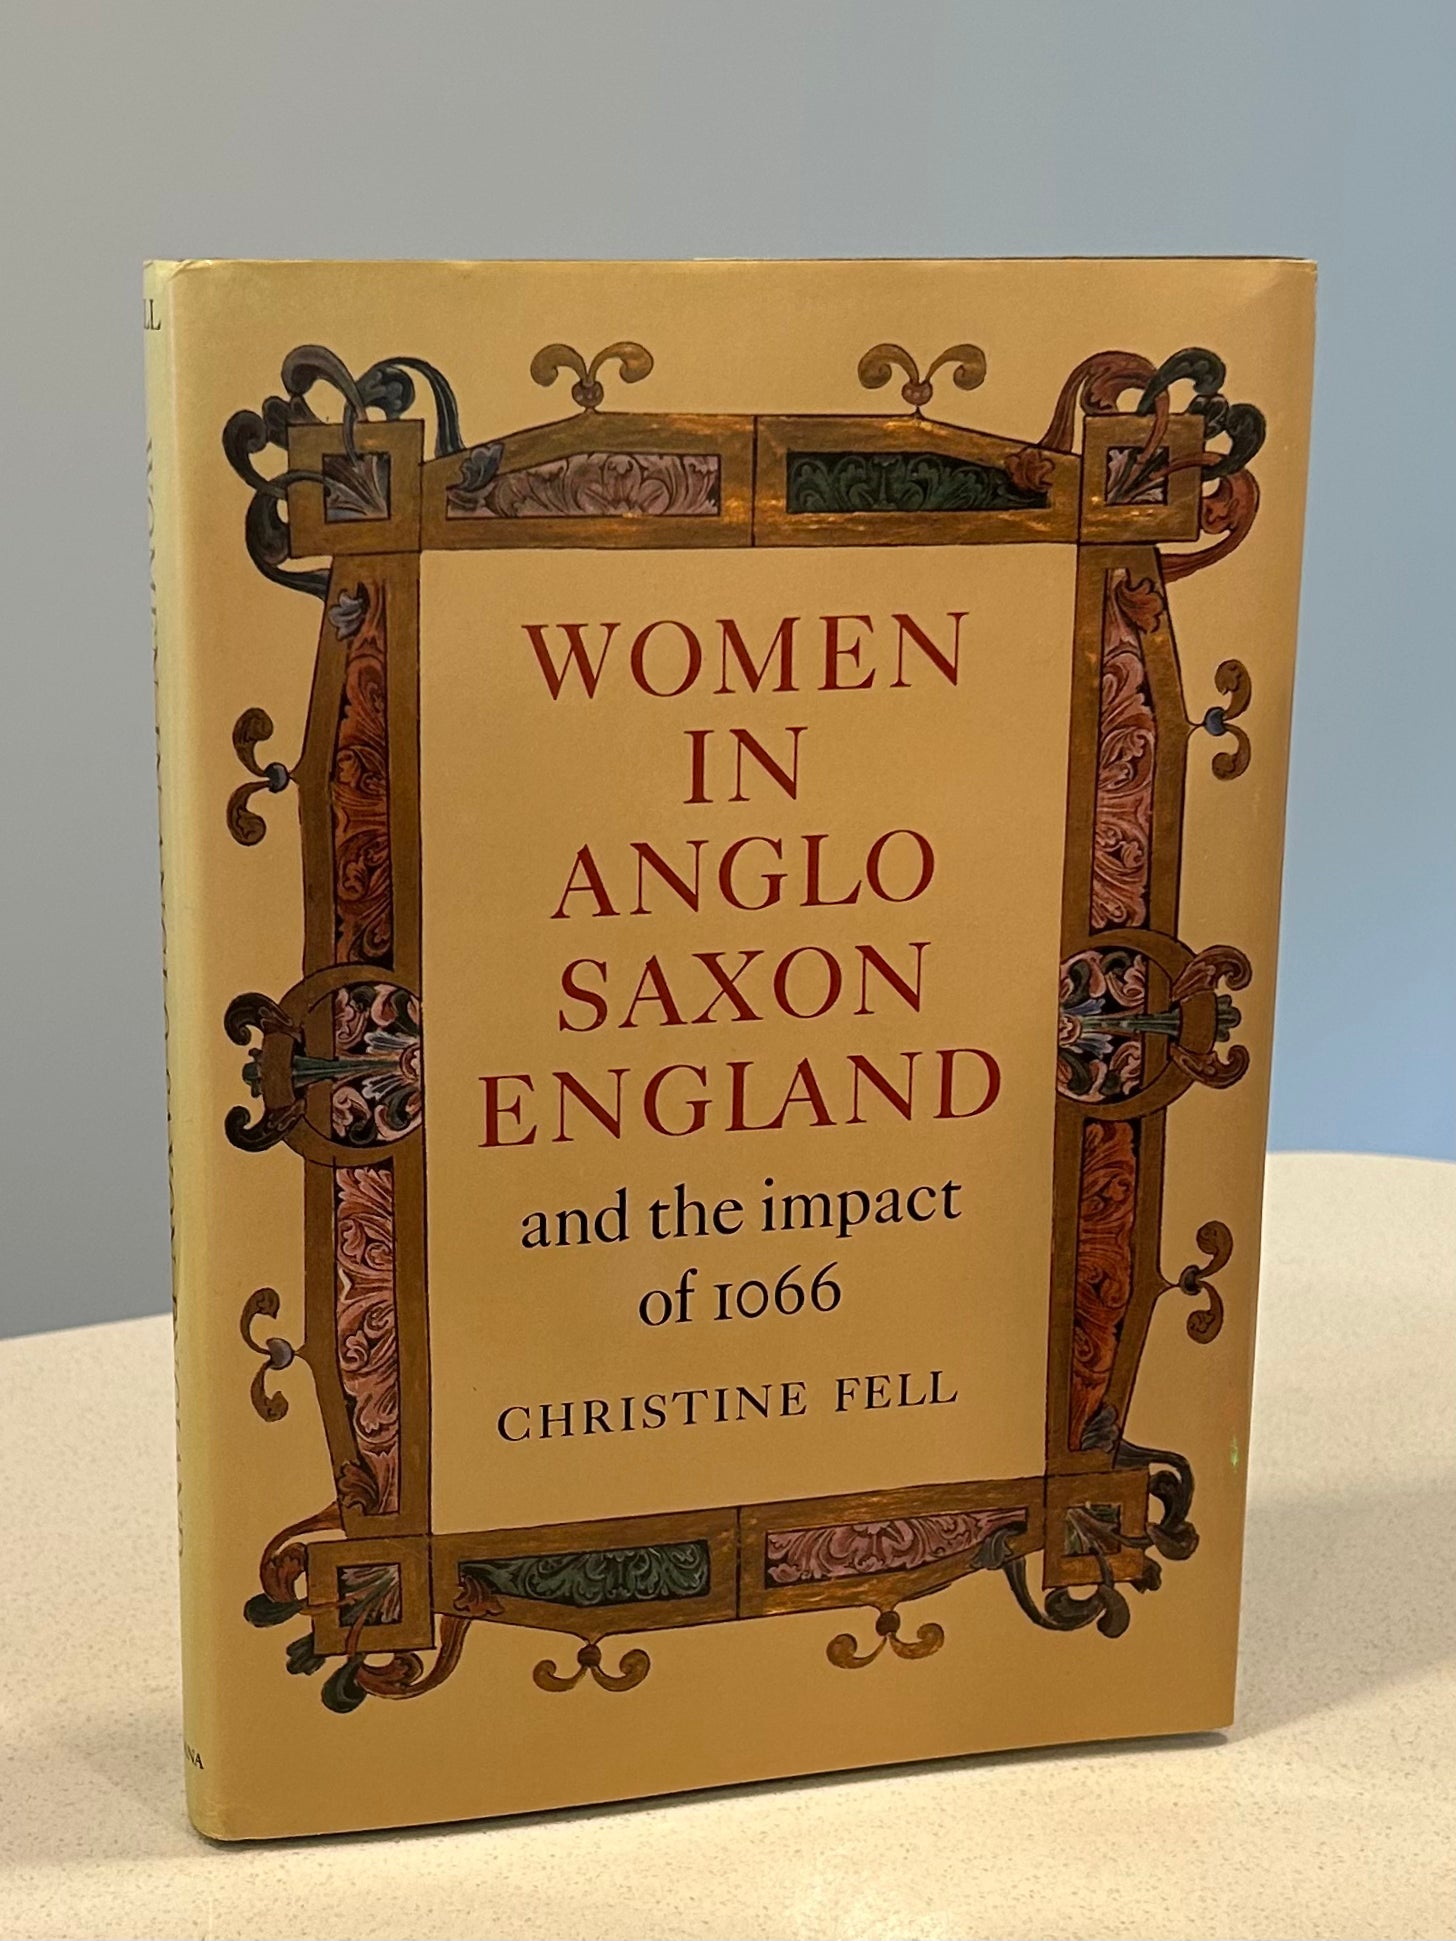 Women in Anglo Saxon England and the Impact of 1066